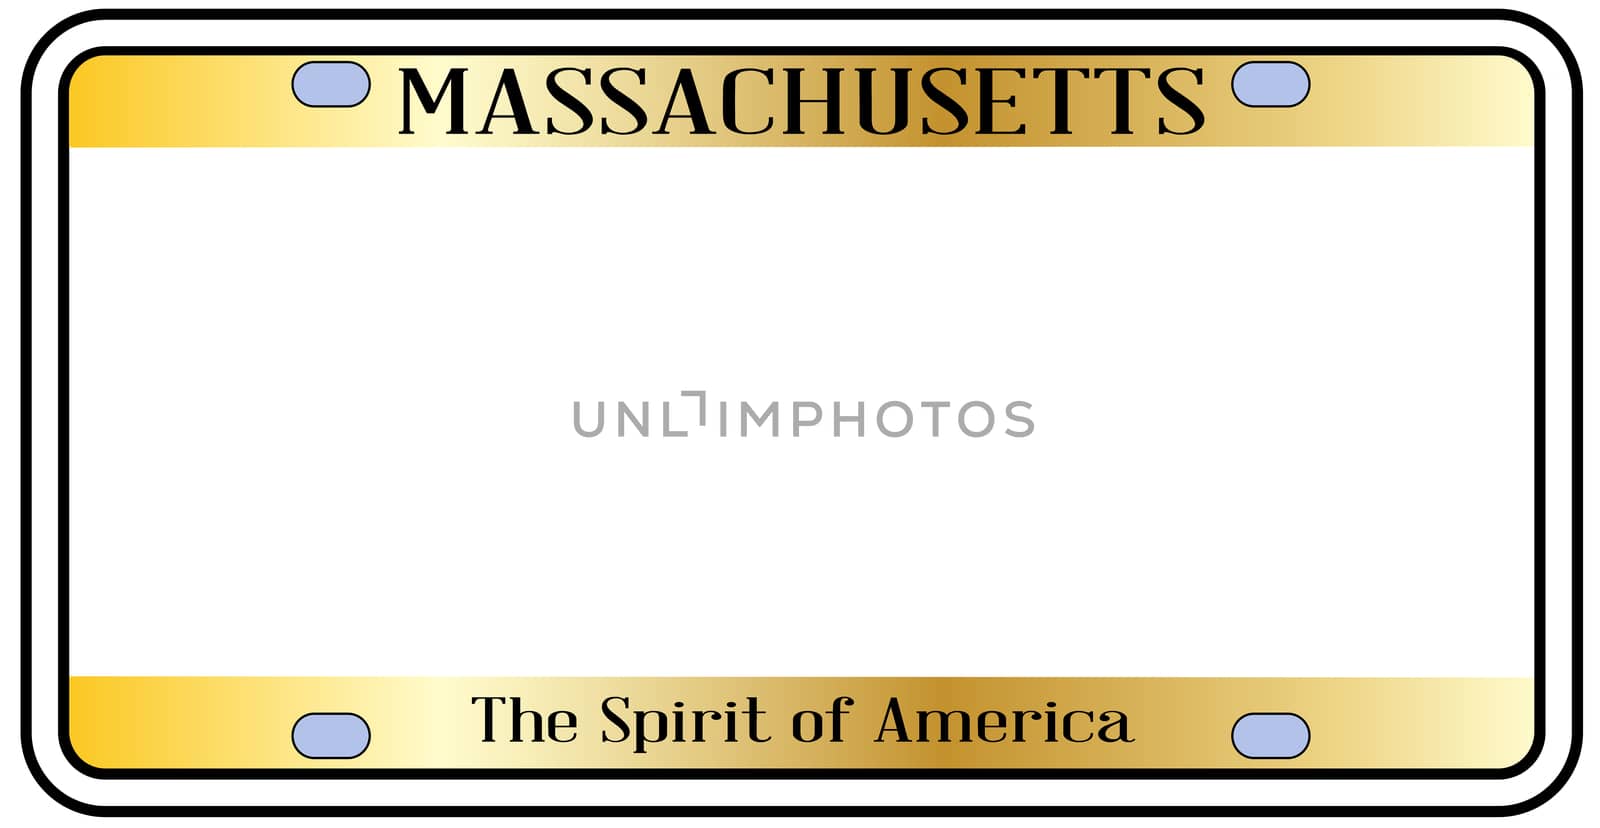 Massachusetts state license plate in the colors of the state flag over a white background